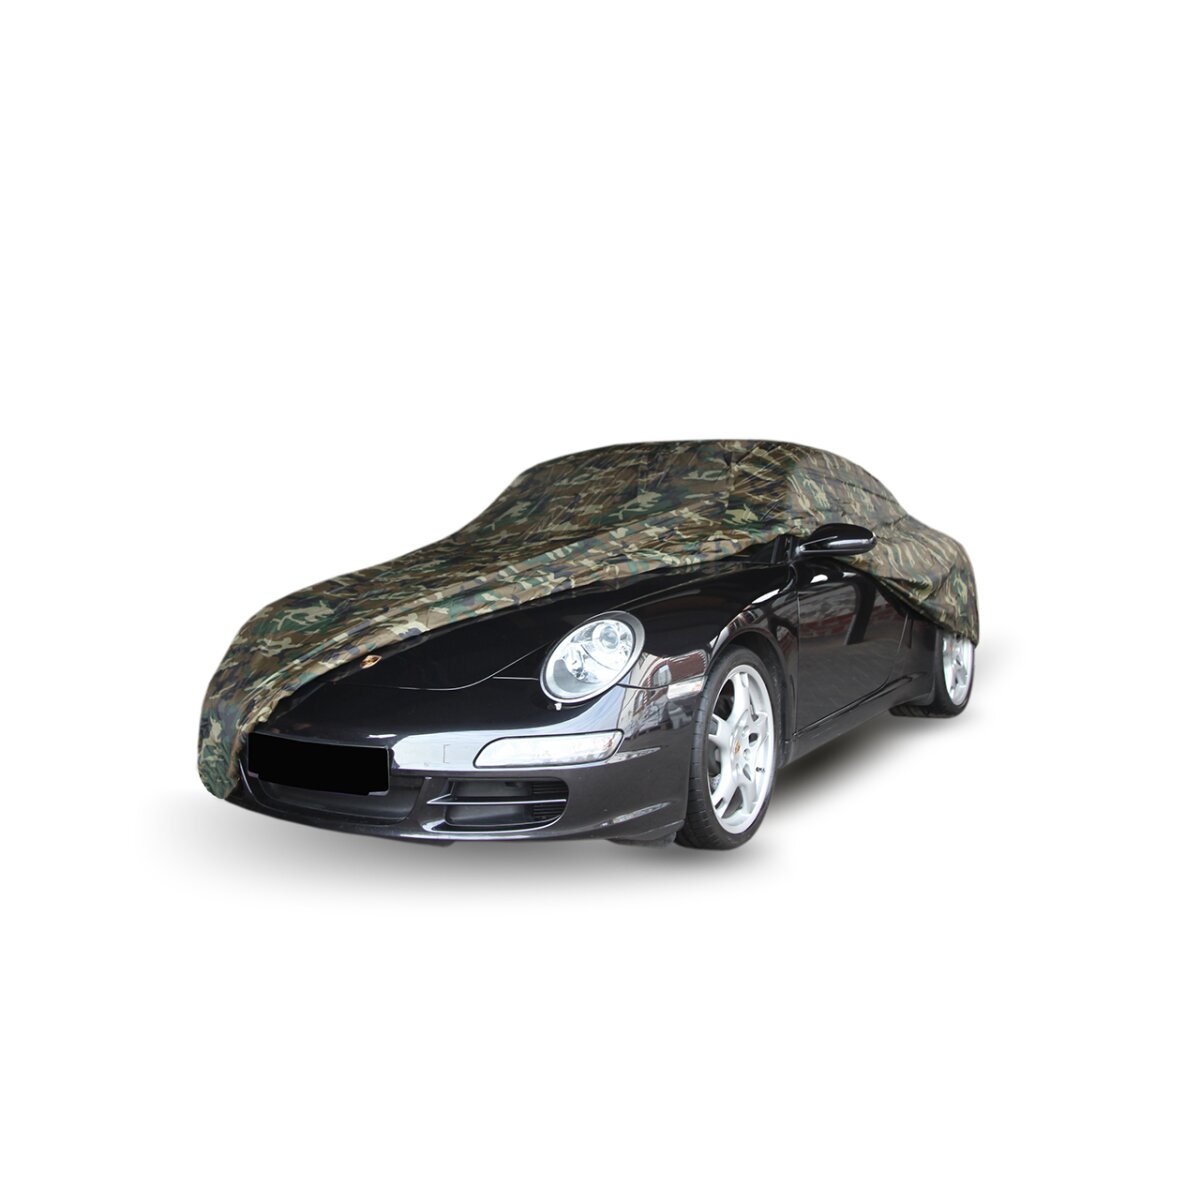 https://www.autoabdeckung.com/media/image/product/11451/lg/autoabdeckung-car-cover-camouflage-fuer-audi-a3-cabriolet-8p.jpg